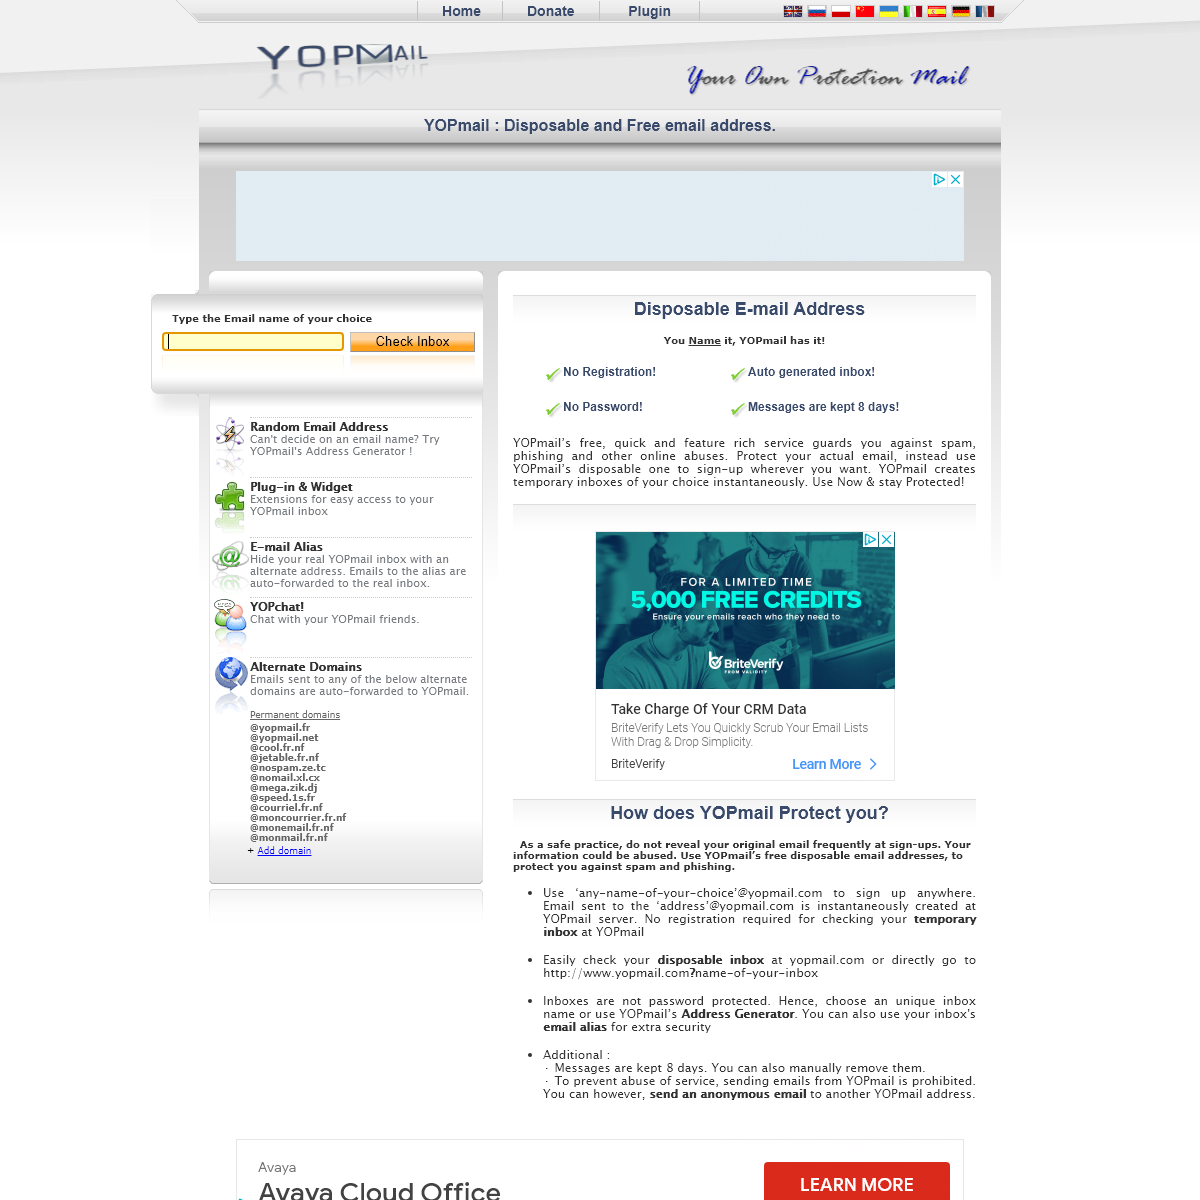 A complete backup of yopmail.com